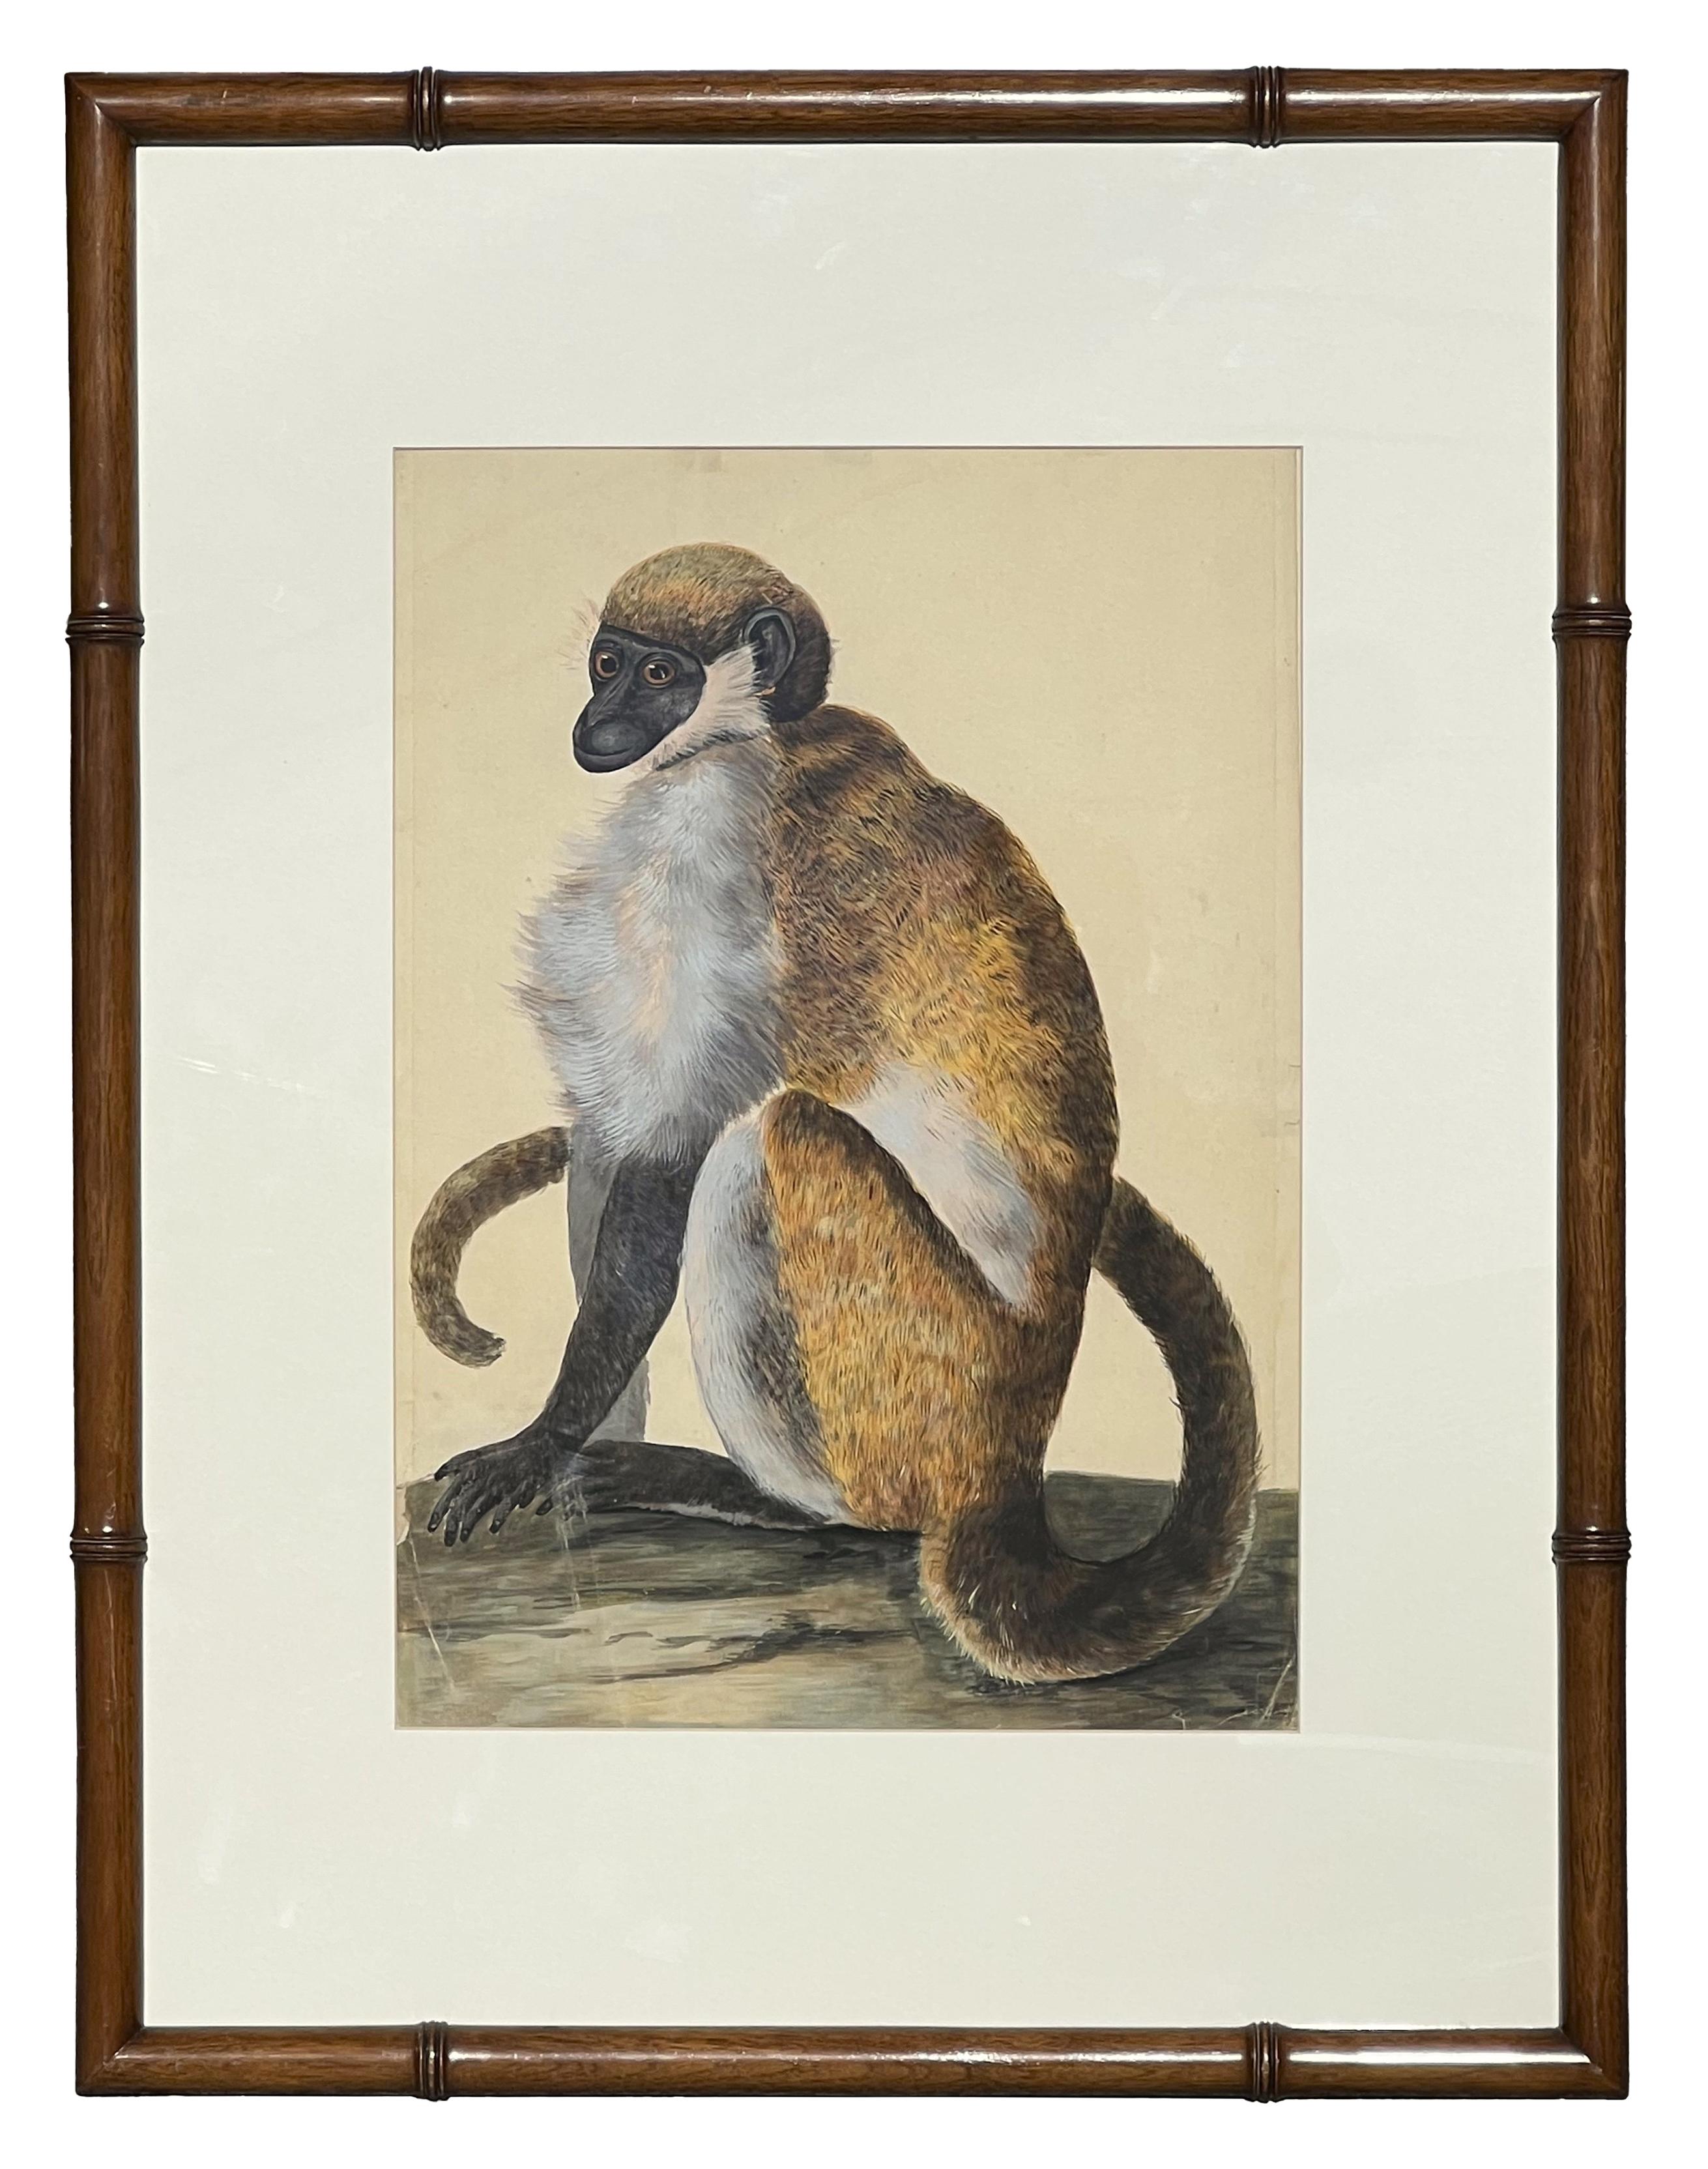 Peter Paillou Animal Art - Early Naturalistic Wildlife Animal Rendering of a Possible Capuchin Monkey